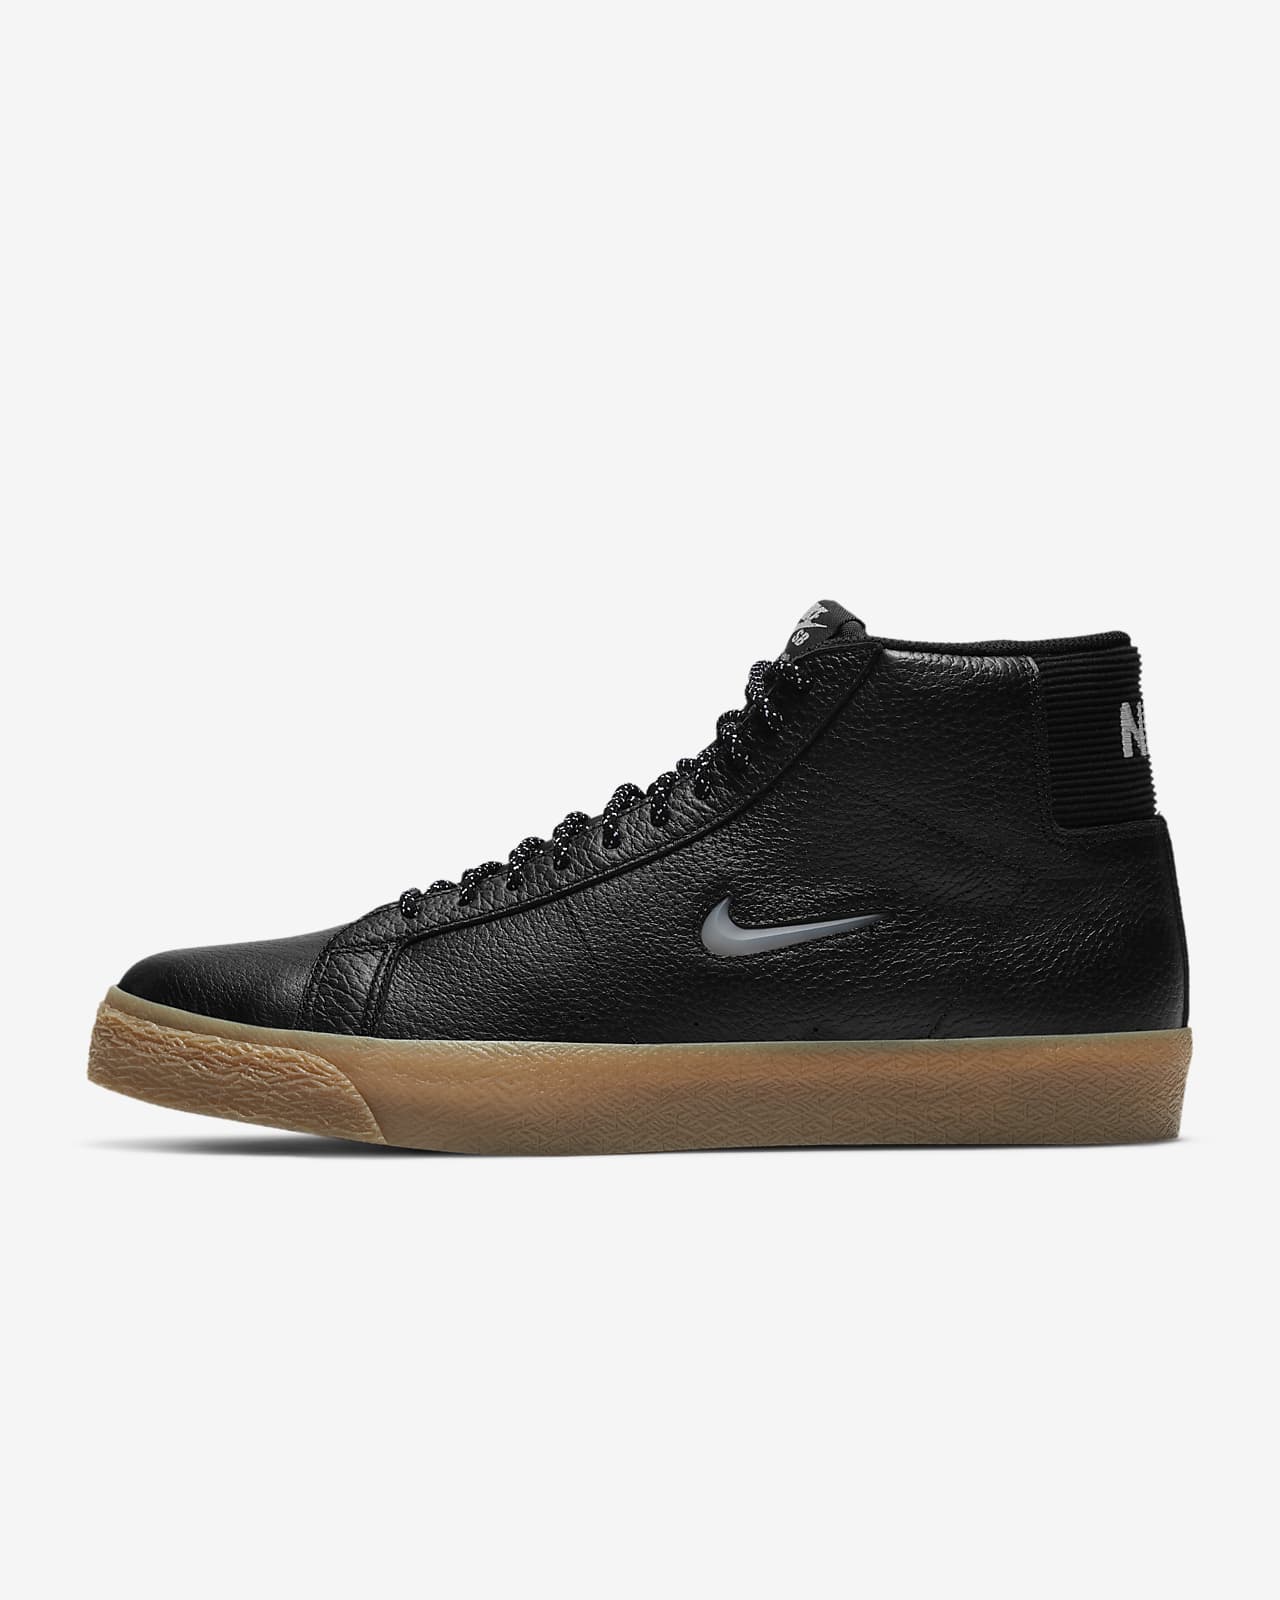 nike leather skate shoes